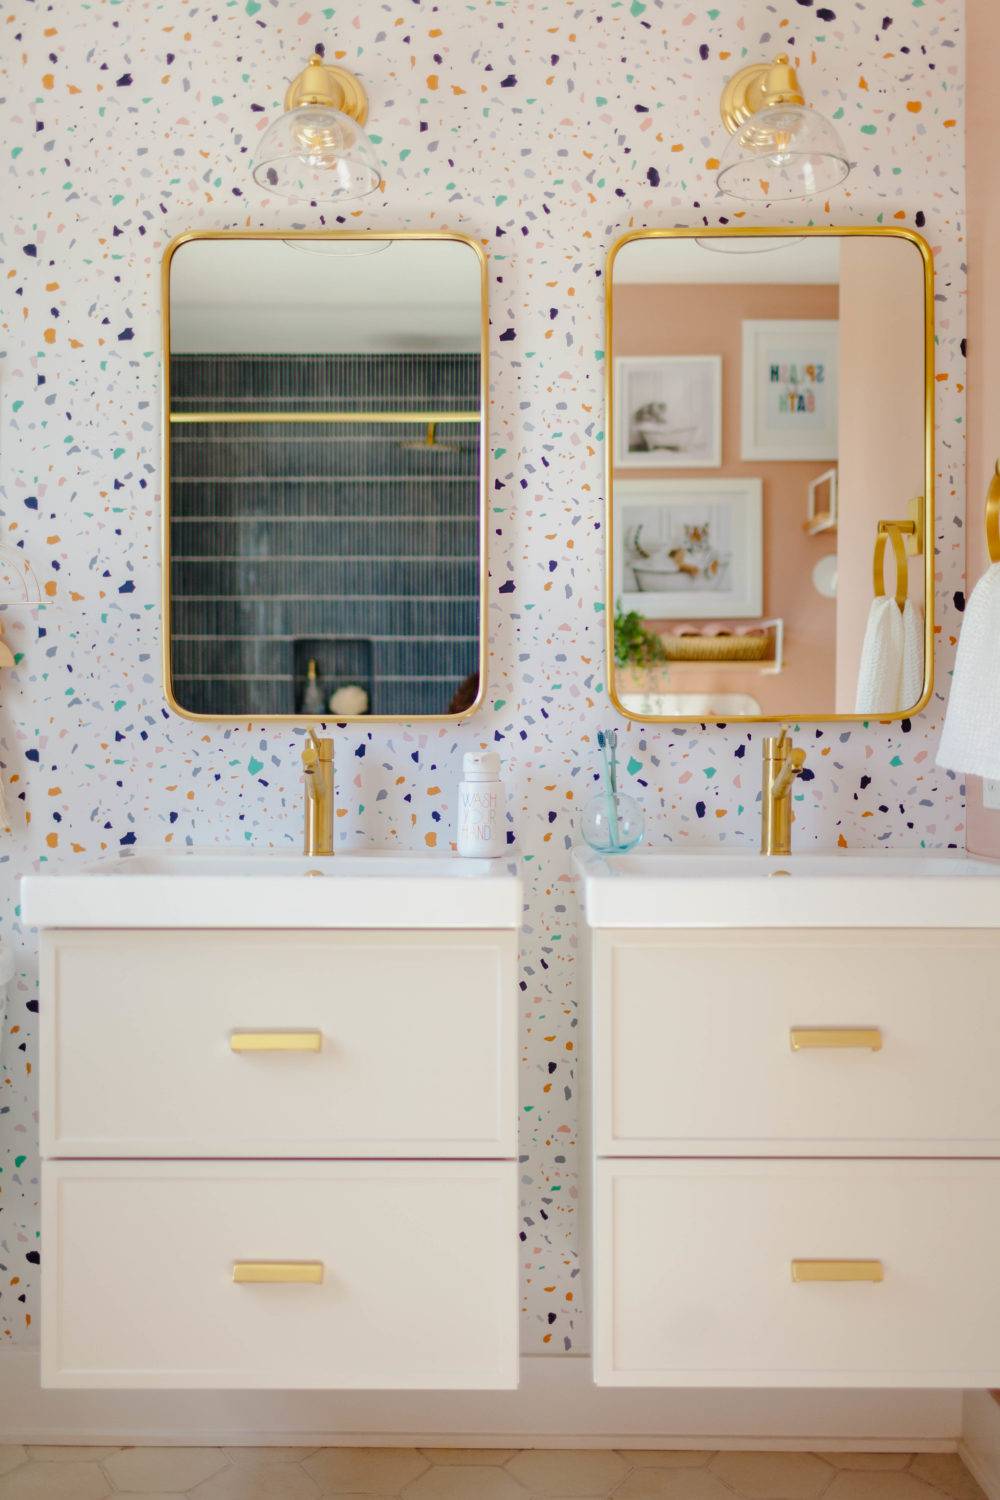 Kids bathroom with pink walls and colorful terrazzo patterned wallpaper